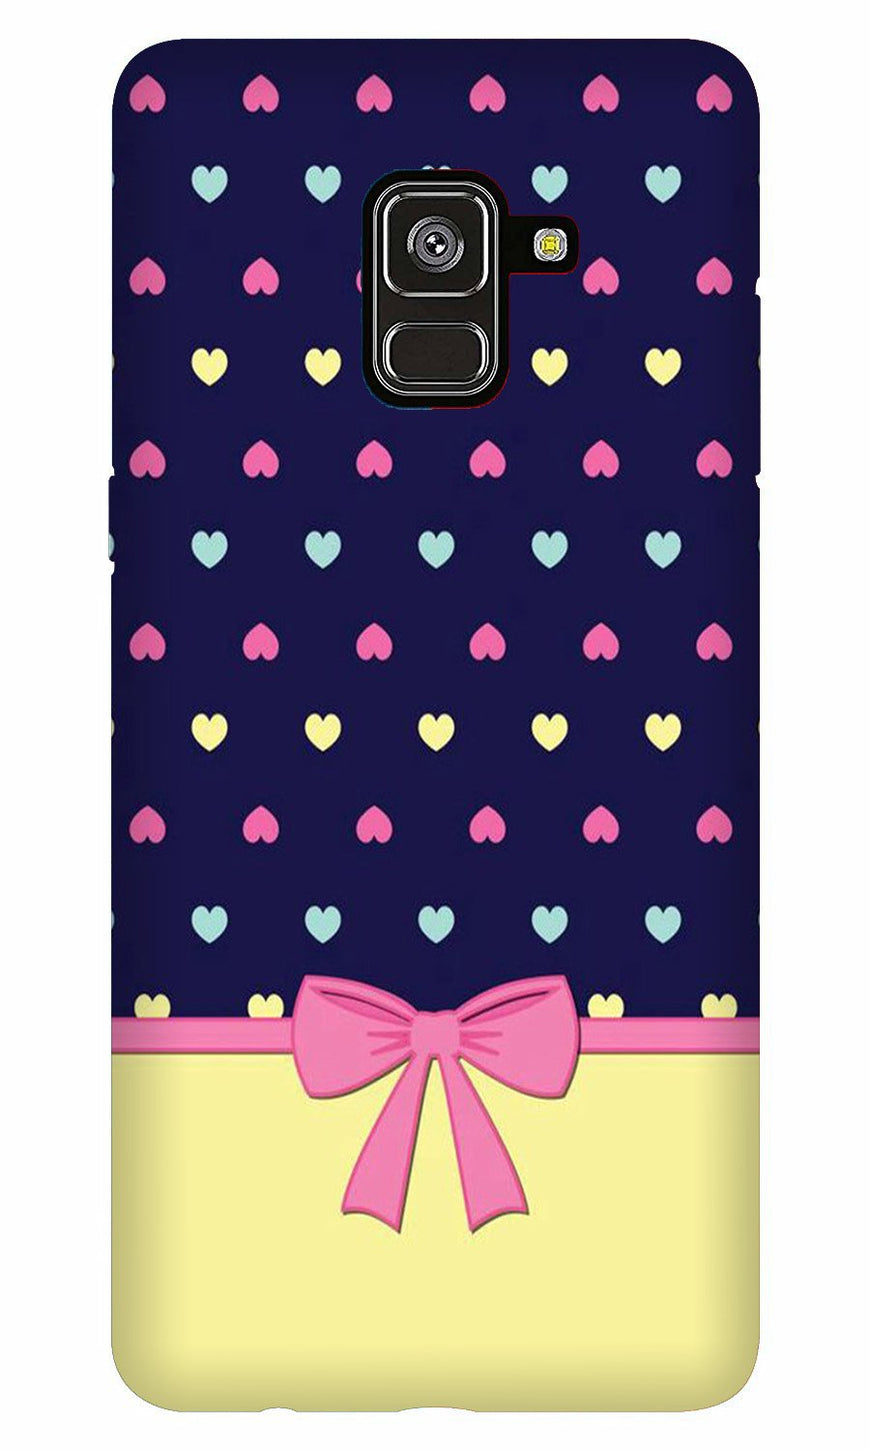 Gift Wrap5 Case for Galaxy A8 Plus